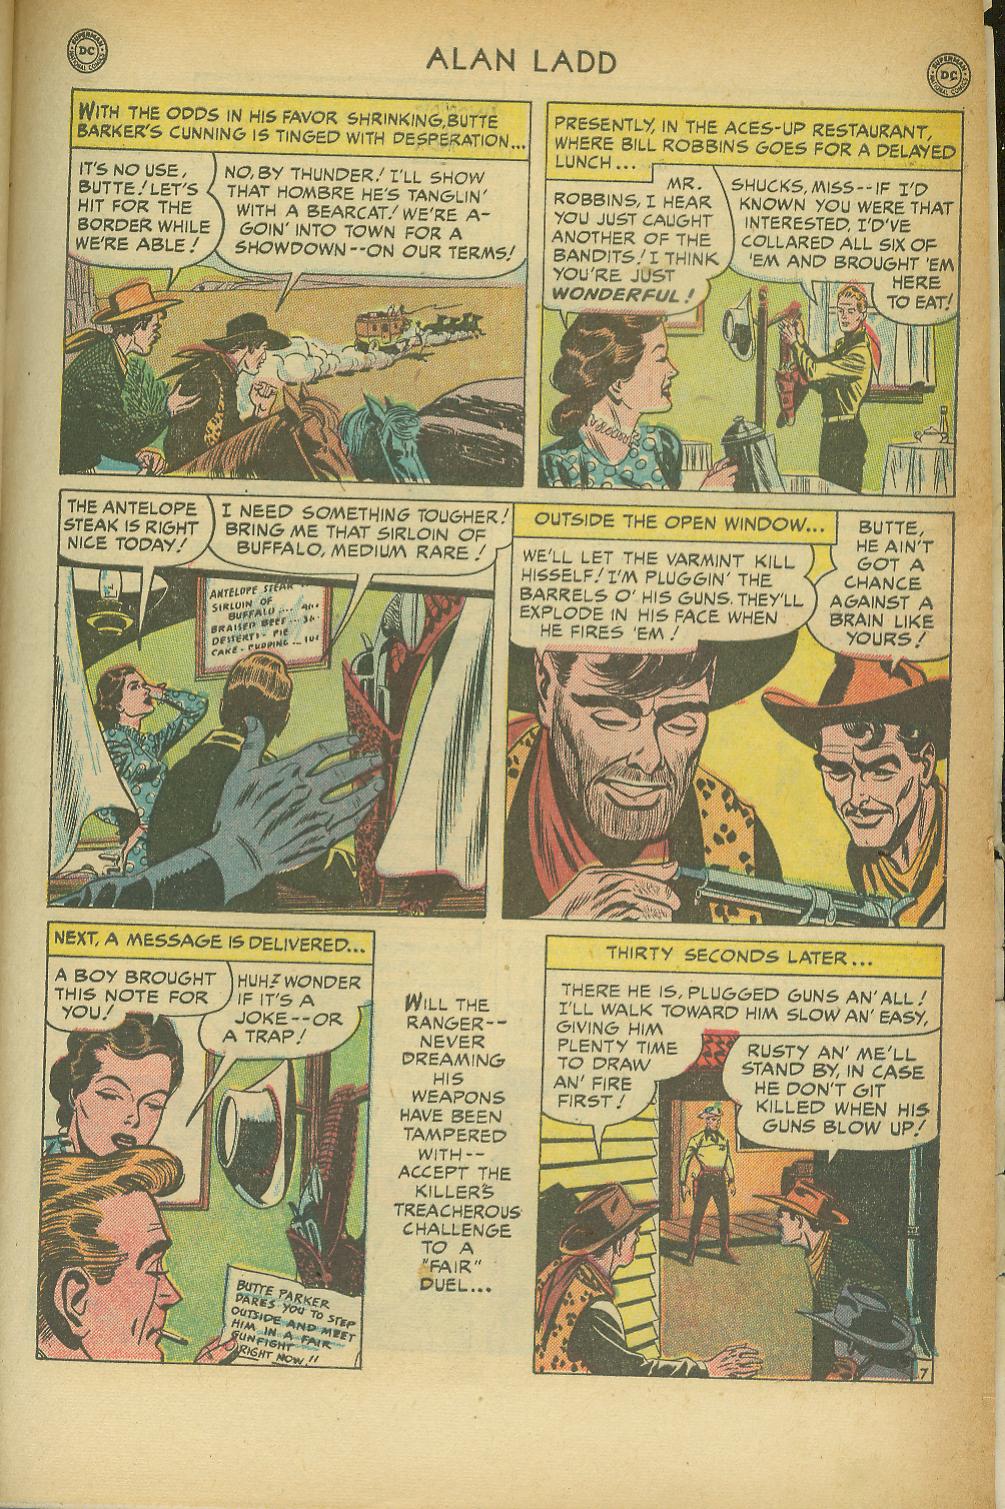 Read online Adventures of Alan Ladd comic -  Issue #8 - 45